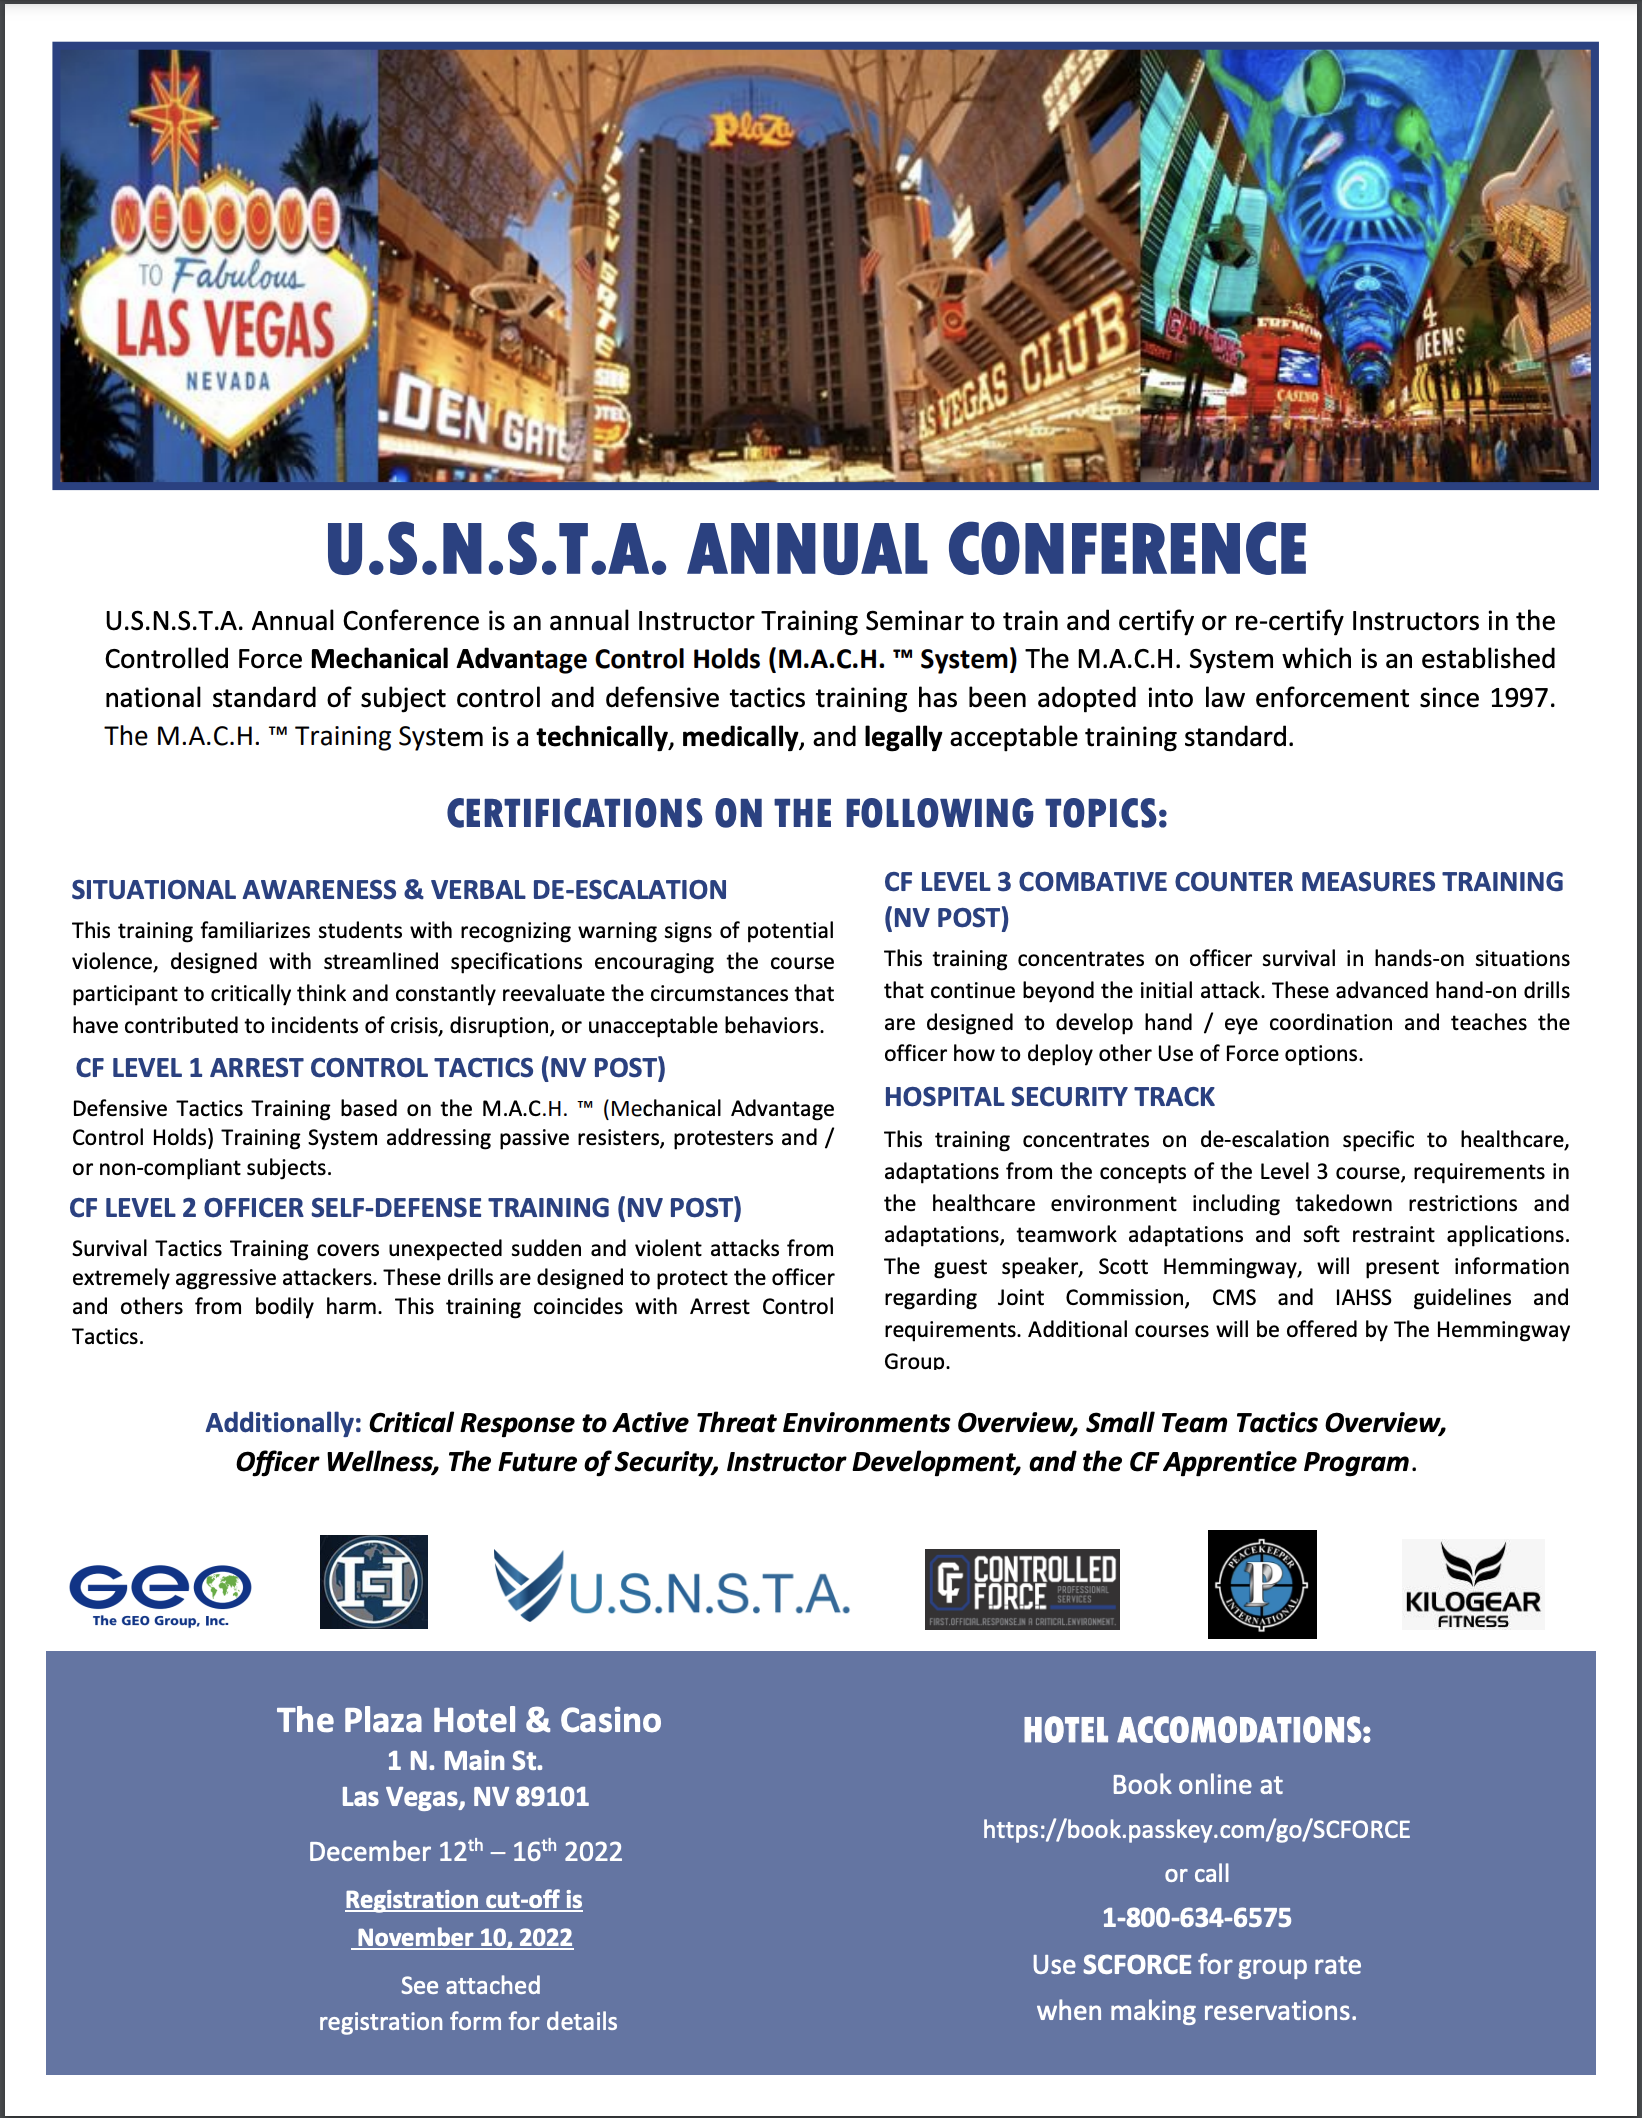 22nd Annual USNSTA Conference – Las Vegas